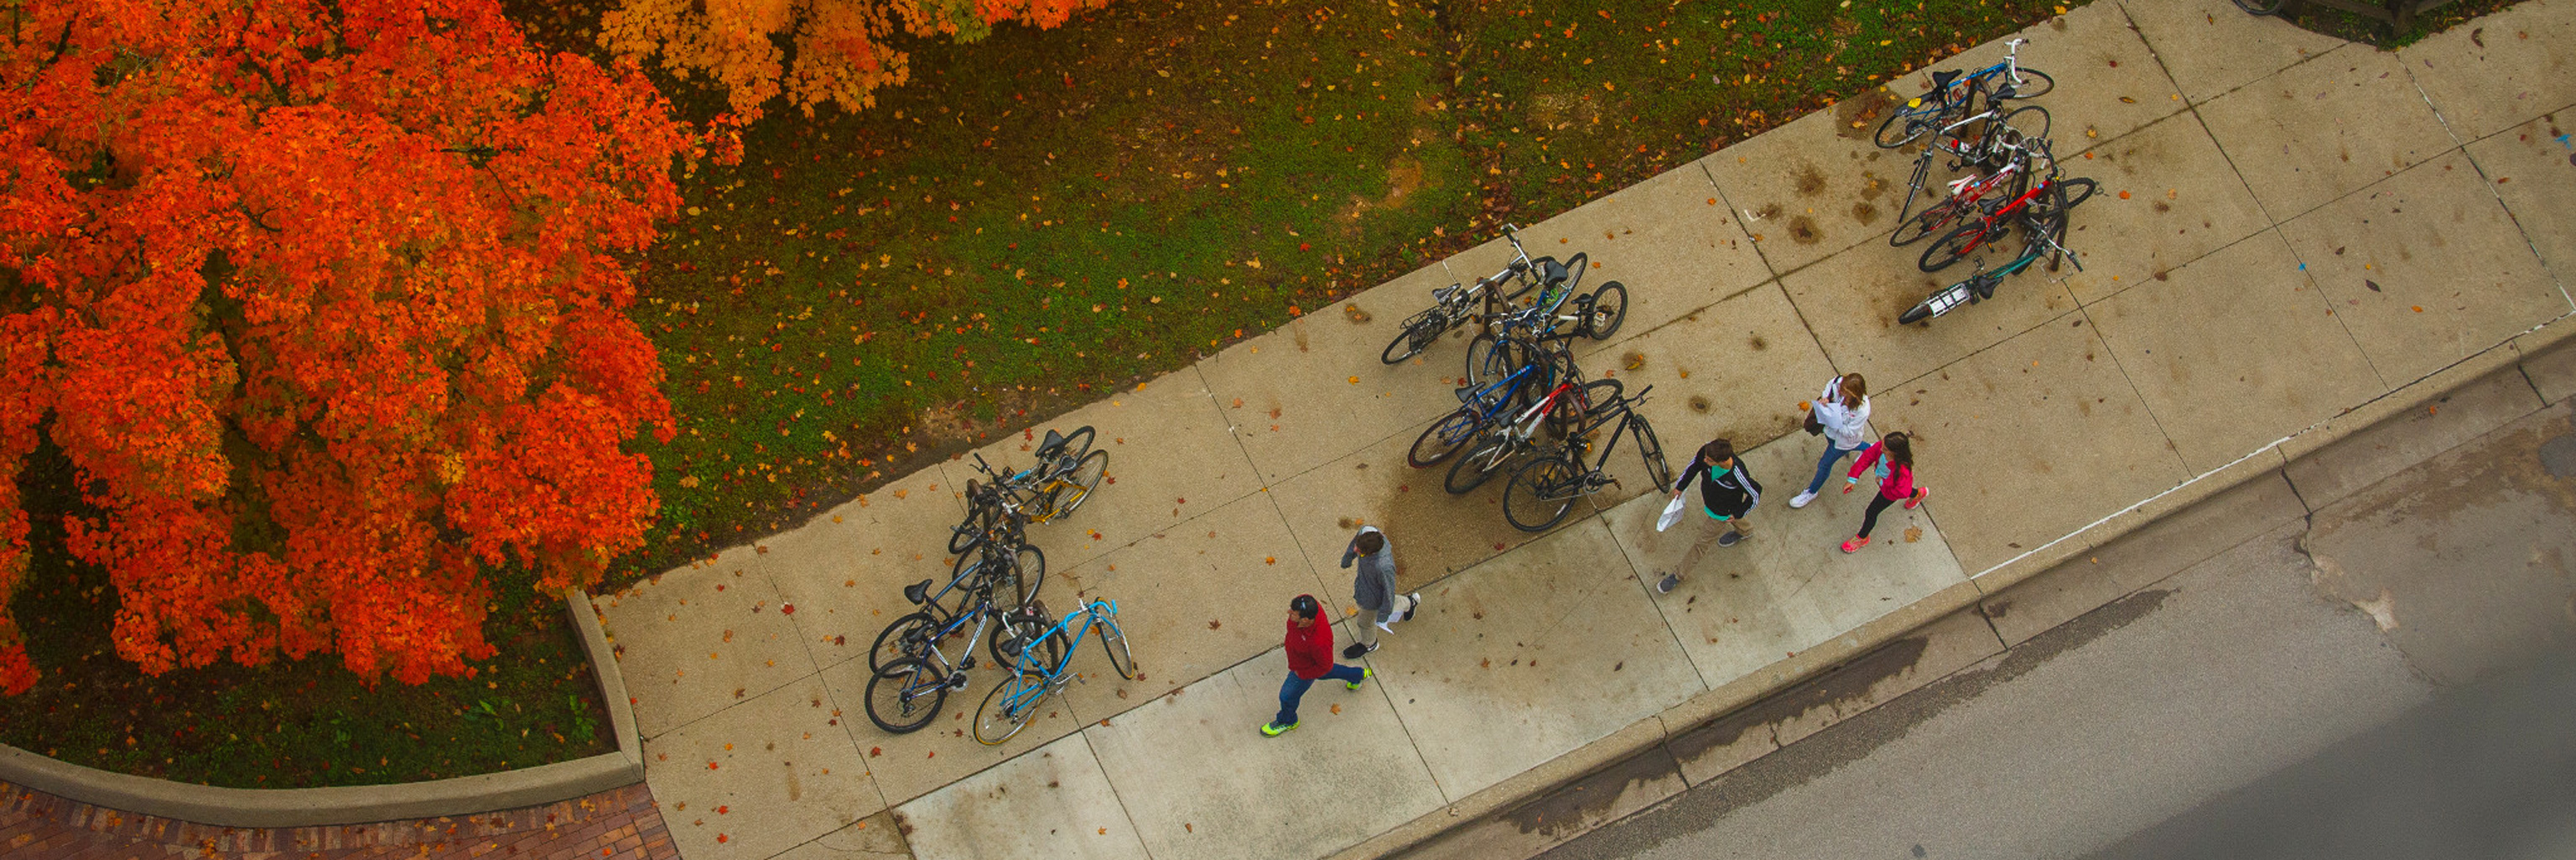 A look at a fall day on IU Campus